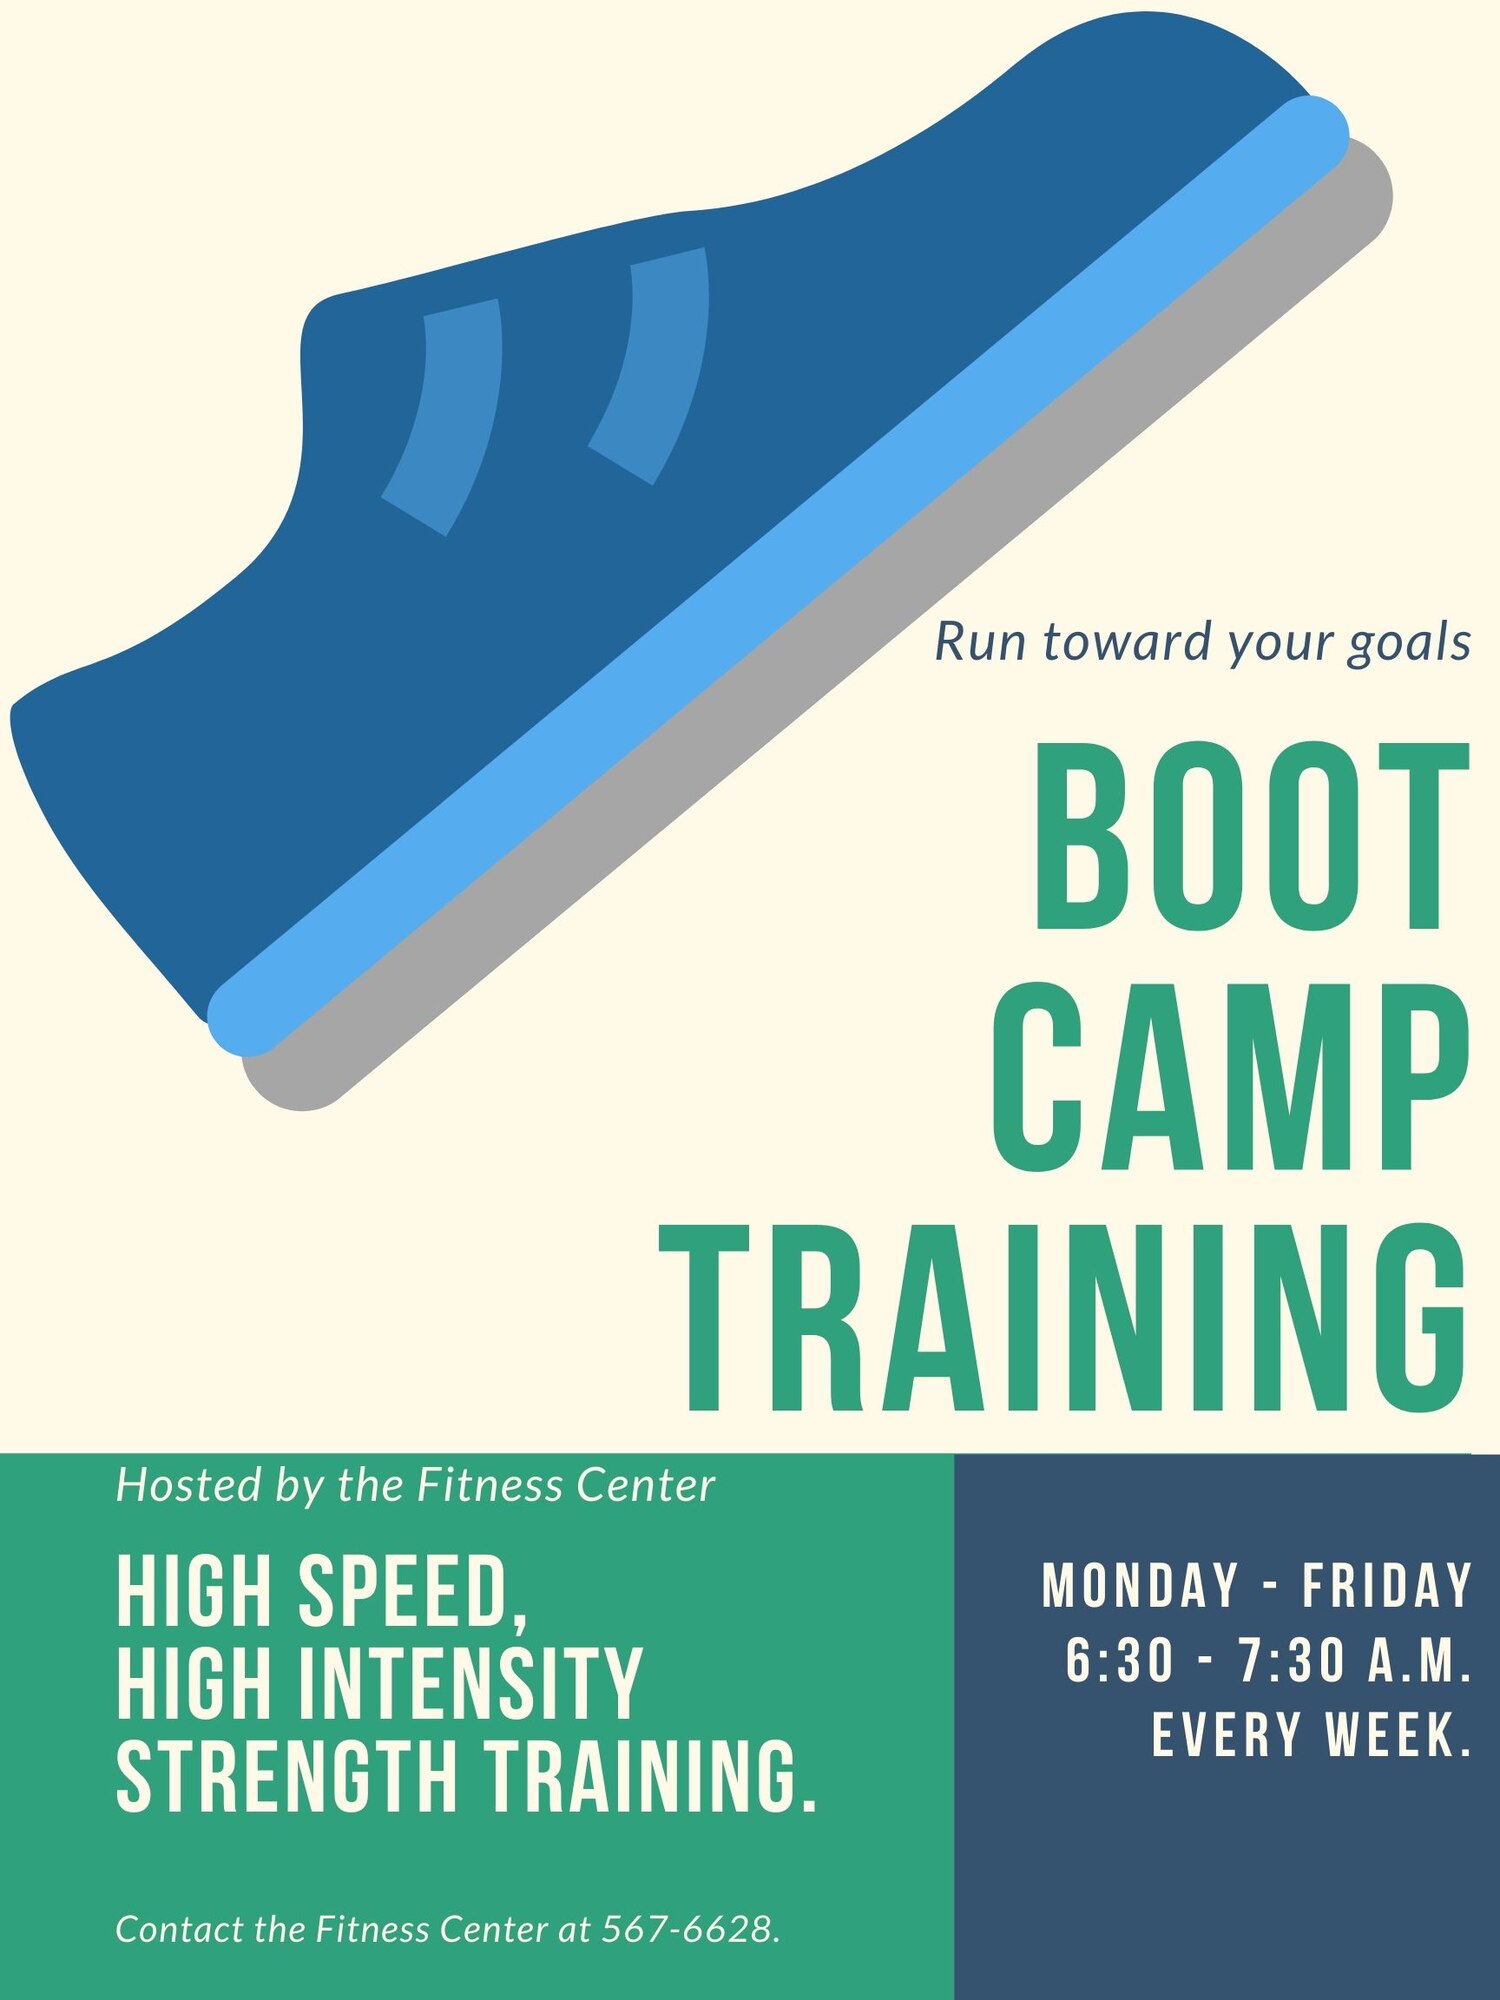 The fitness center offers boot camp training. The training takes place every weekday, barring a base closure, from 6:30 – 7:30 a.m. The workout consists of high-intensity and high-speed strength training. Anyone with access to the installation can attend the workout for free. (U.S. Air Force graphic by Airman 1st Class Jonathan Whitely